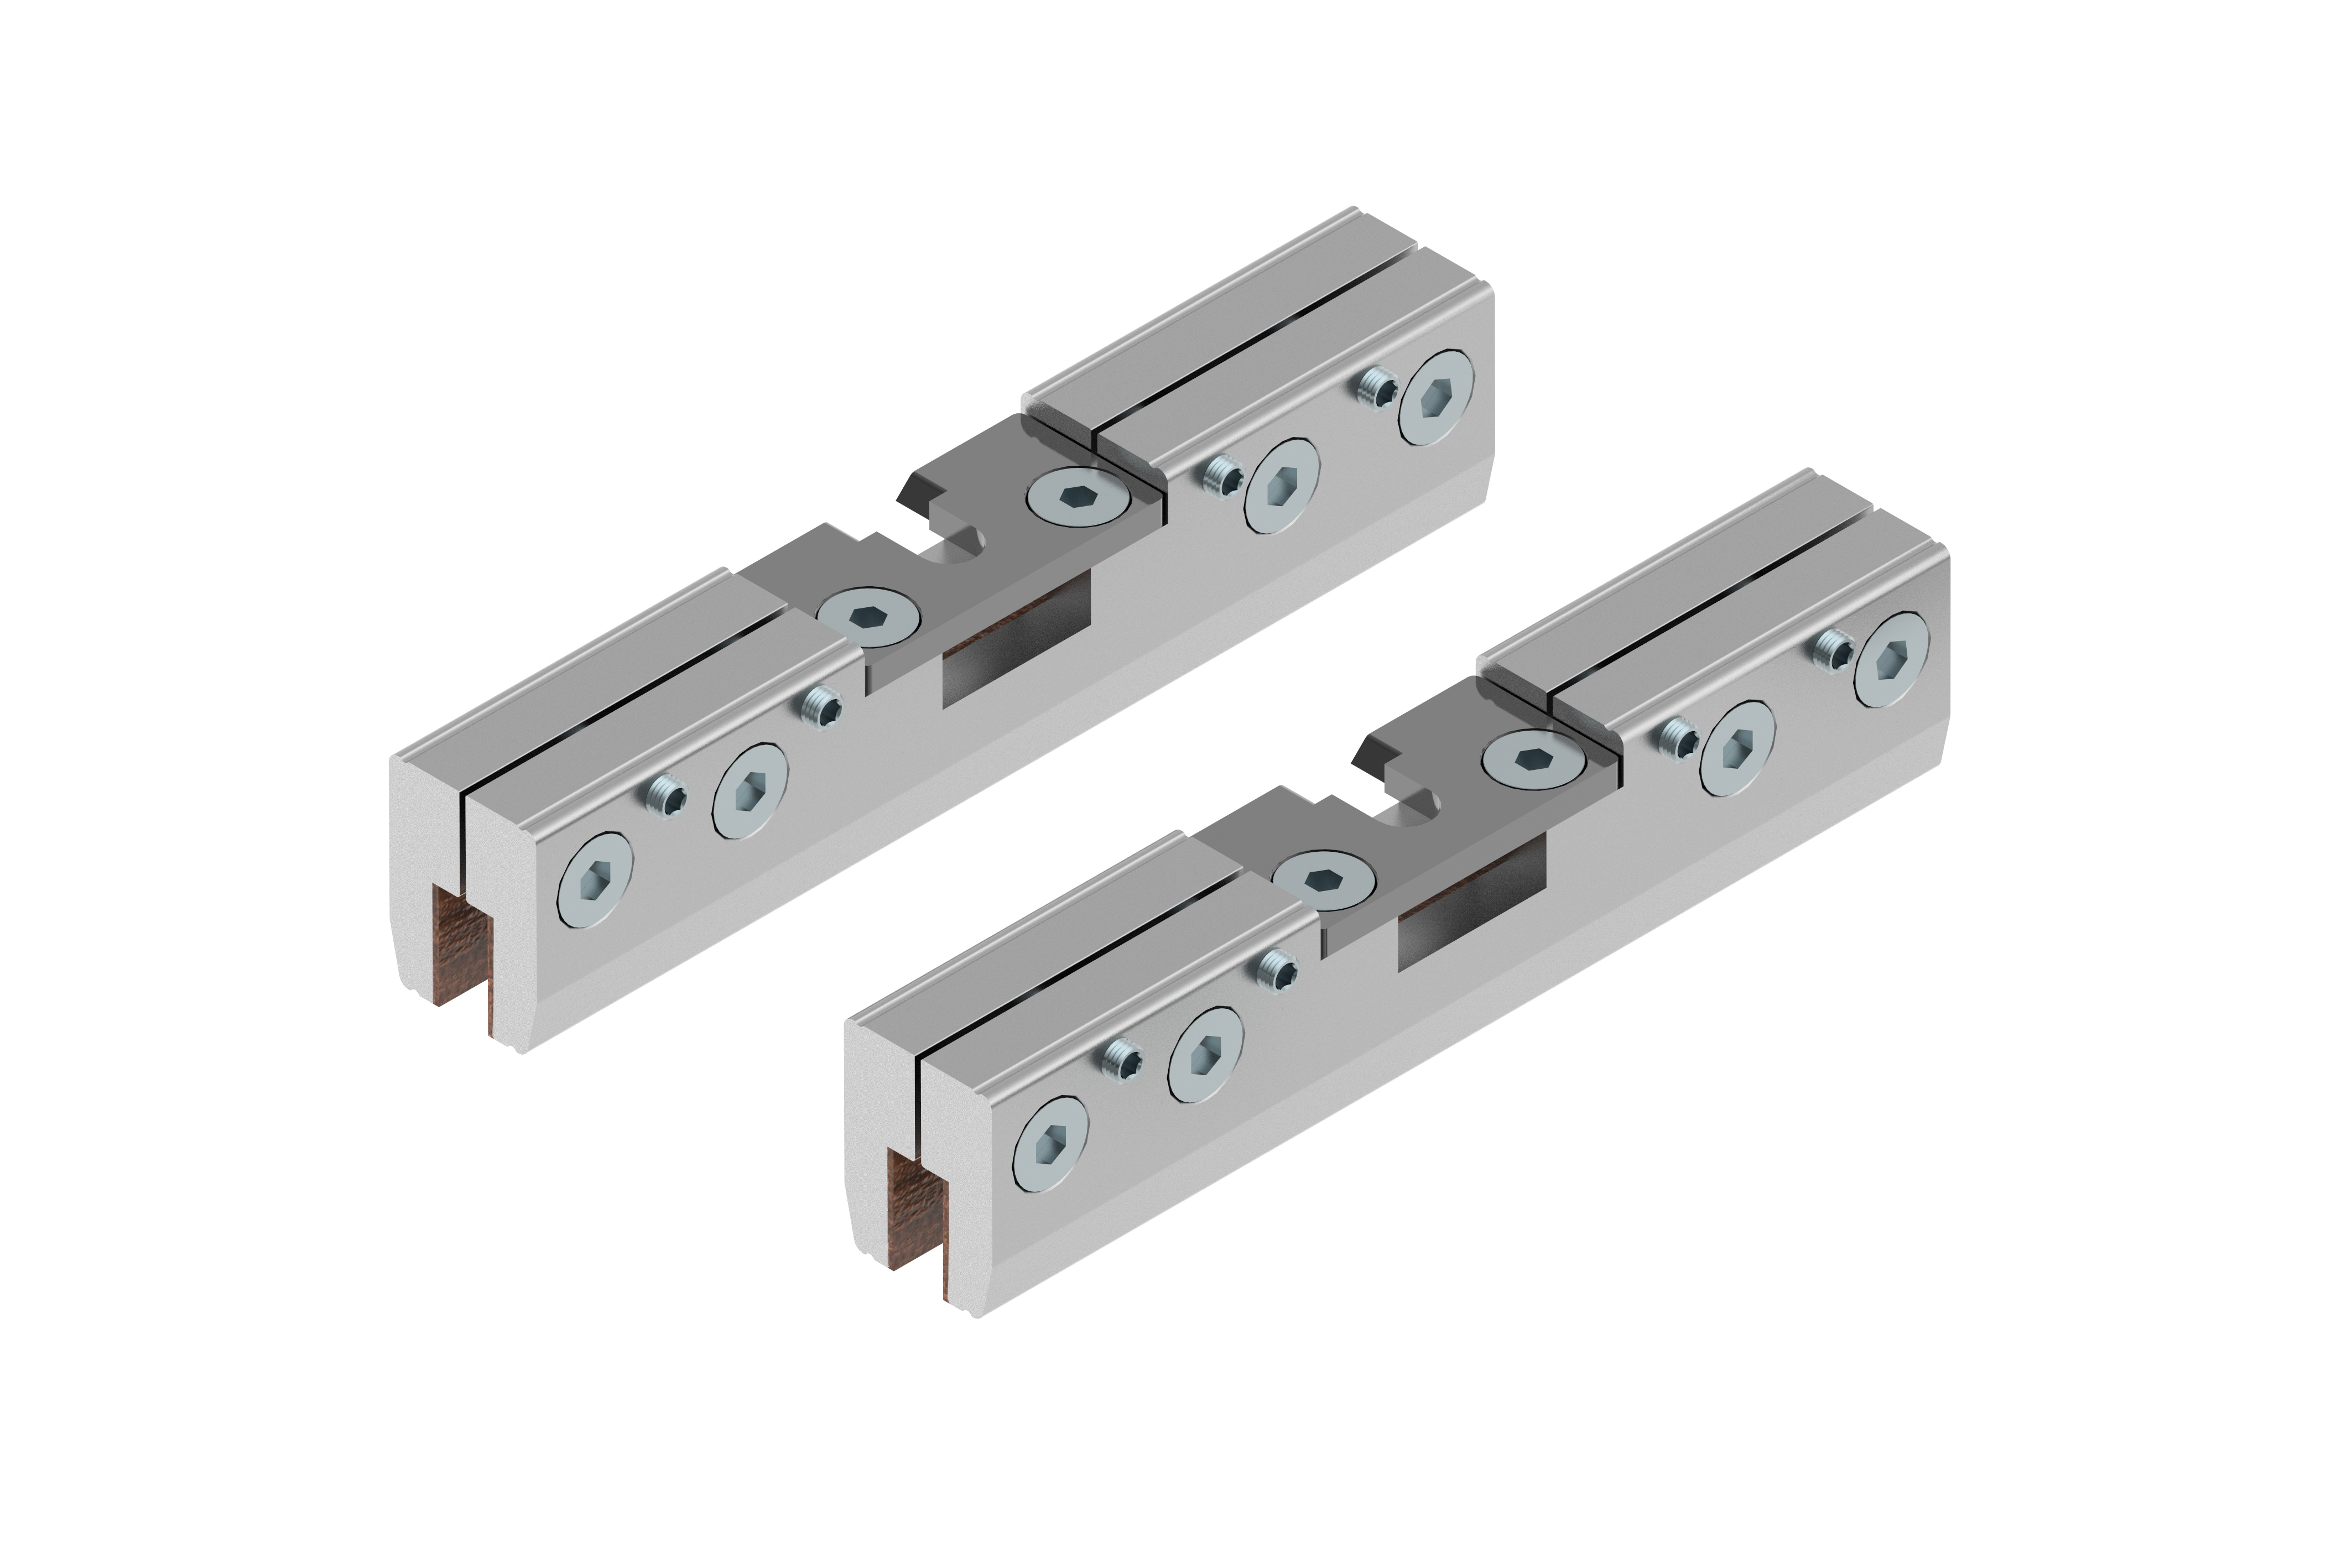 SV-EASY A90 clamps set